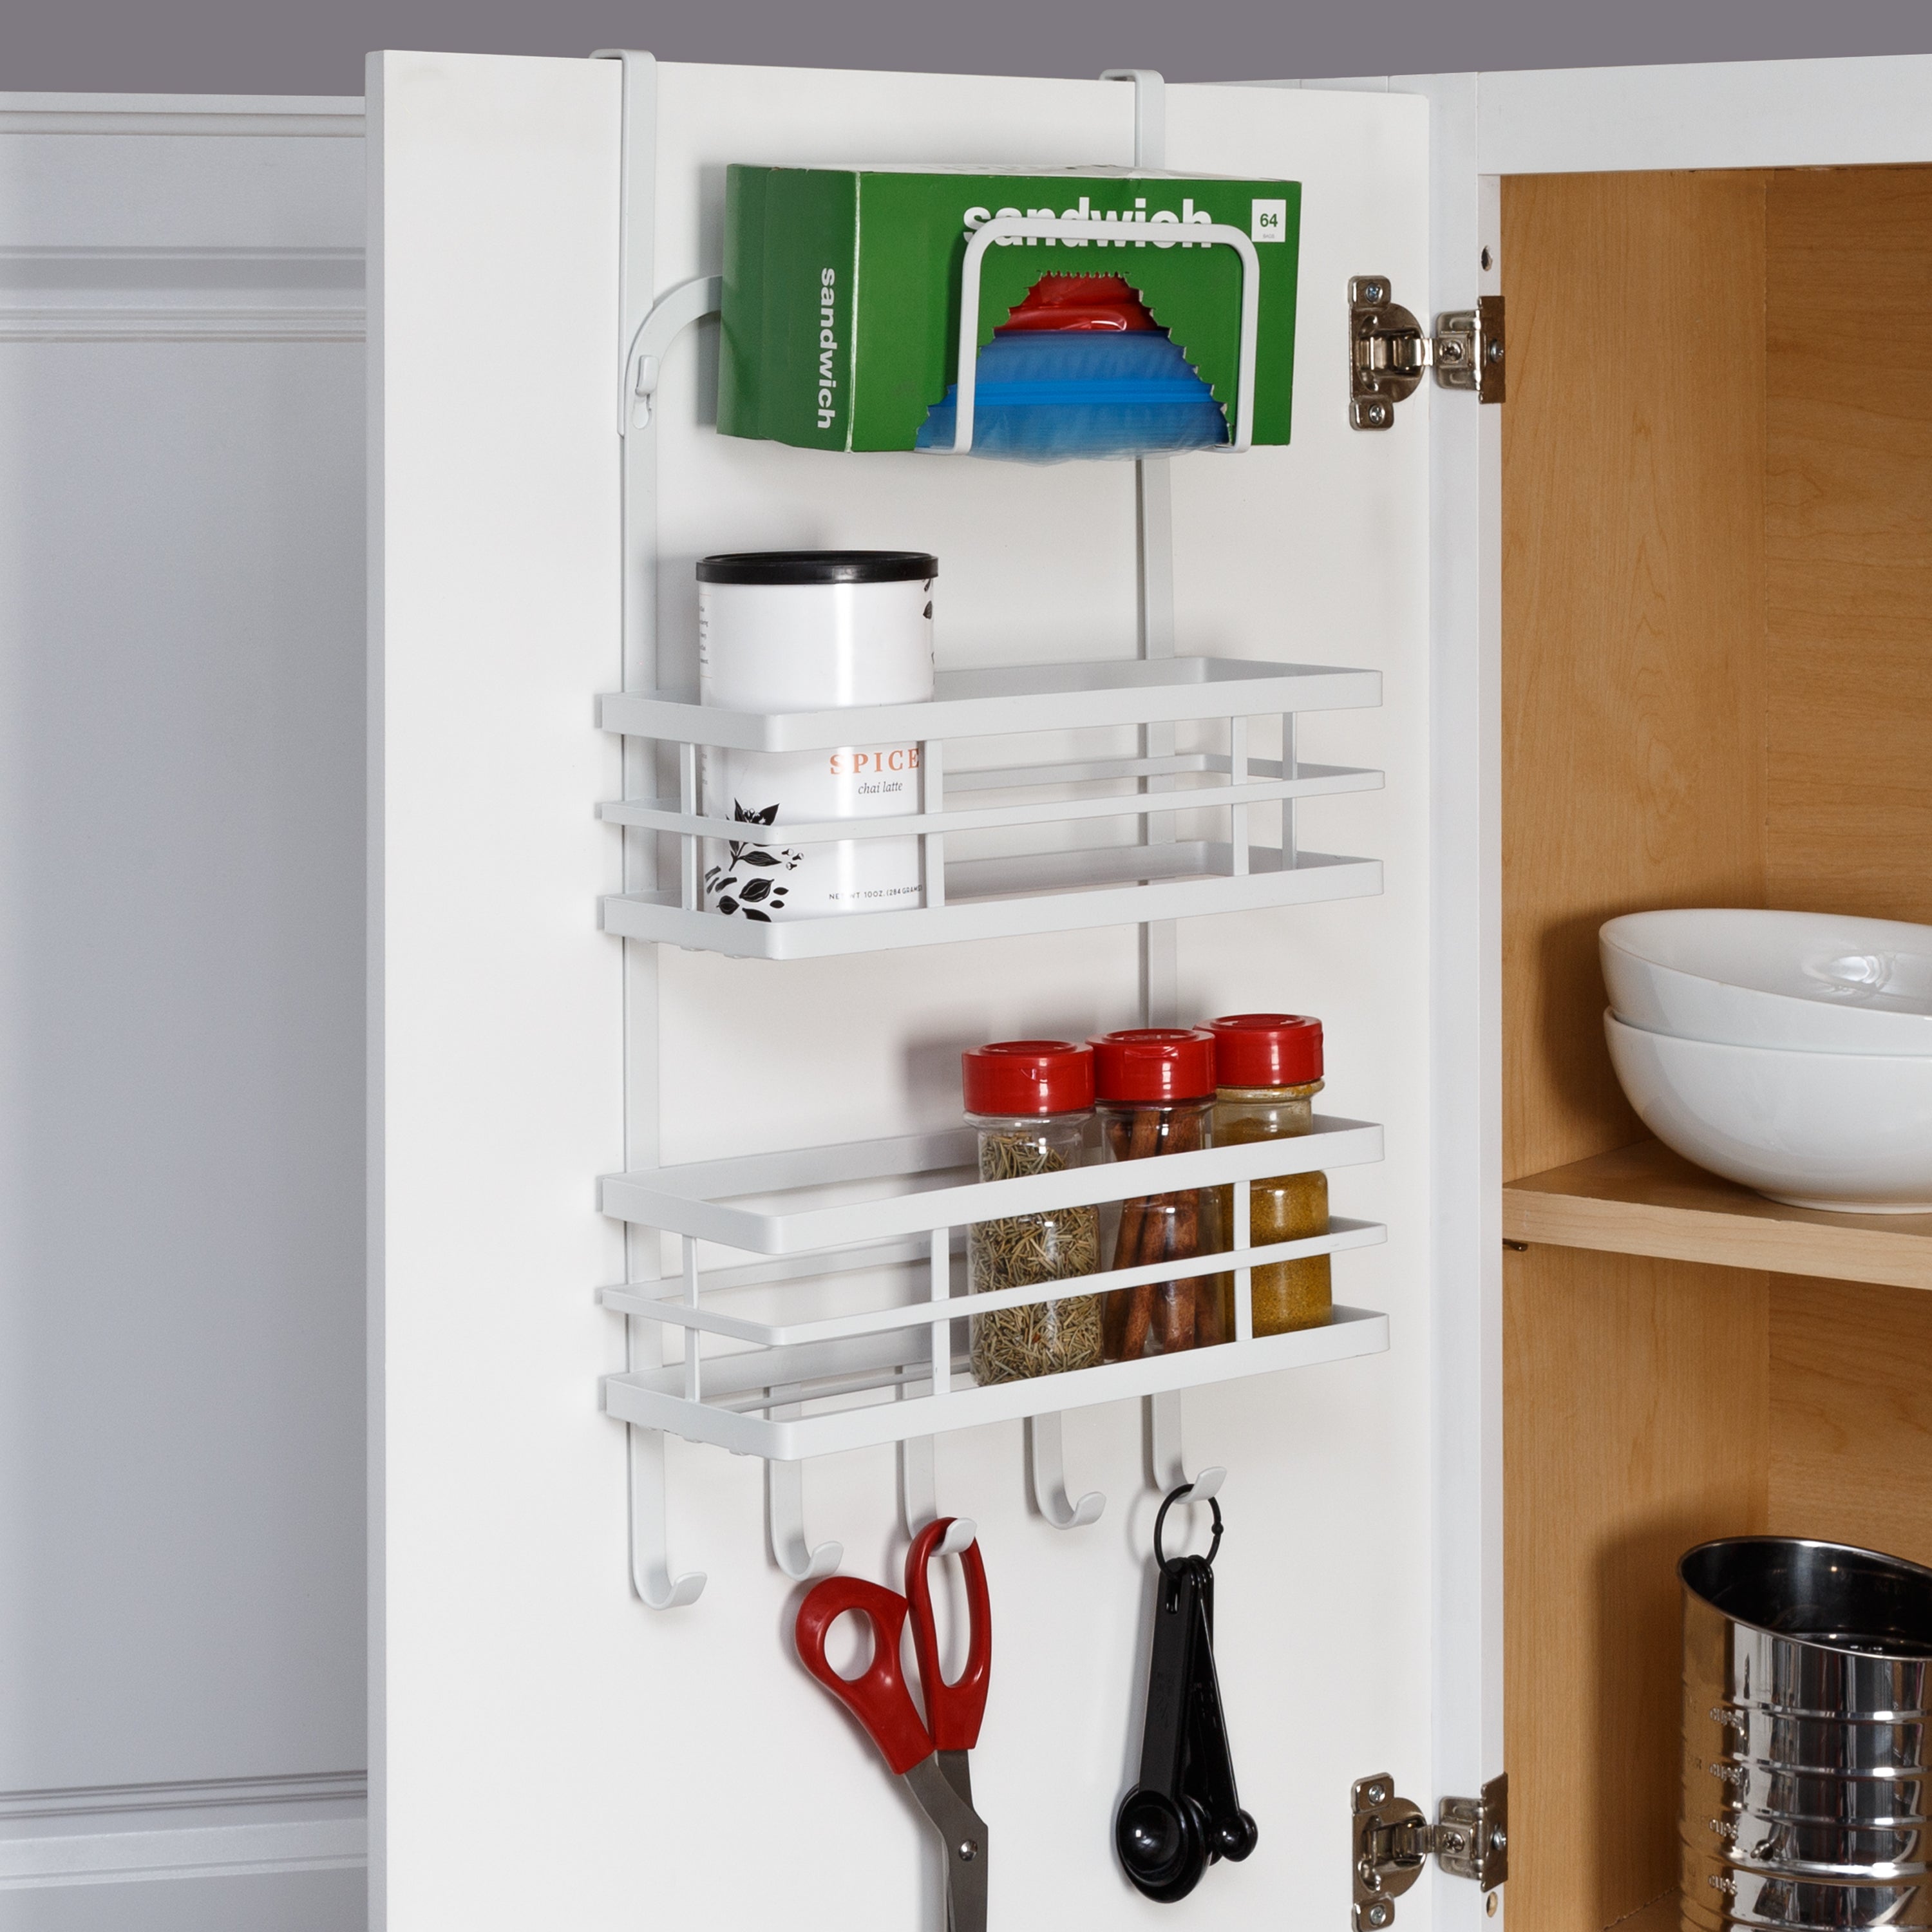 mDesign Over Cabinet Paper Towel Holder with Multi-Purpose Shelf - Chrome